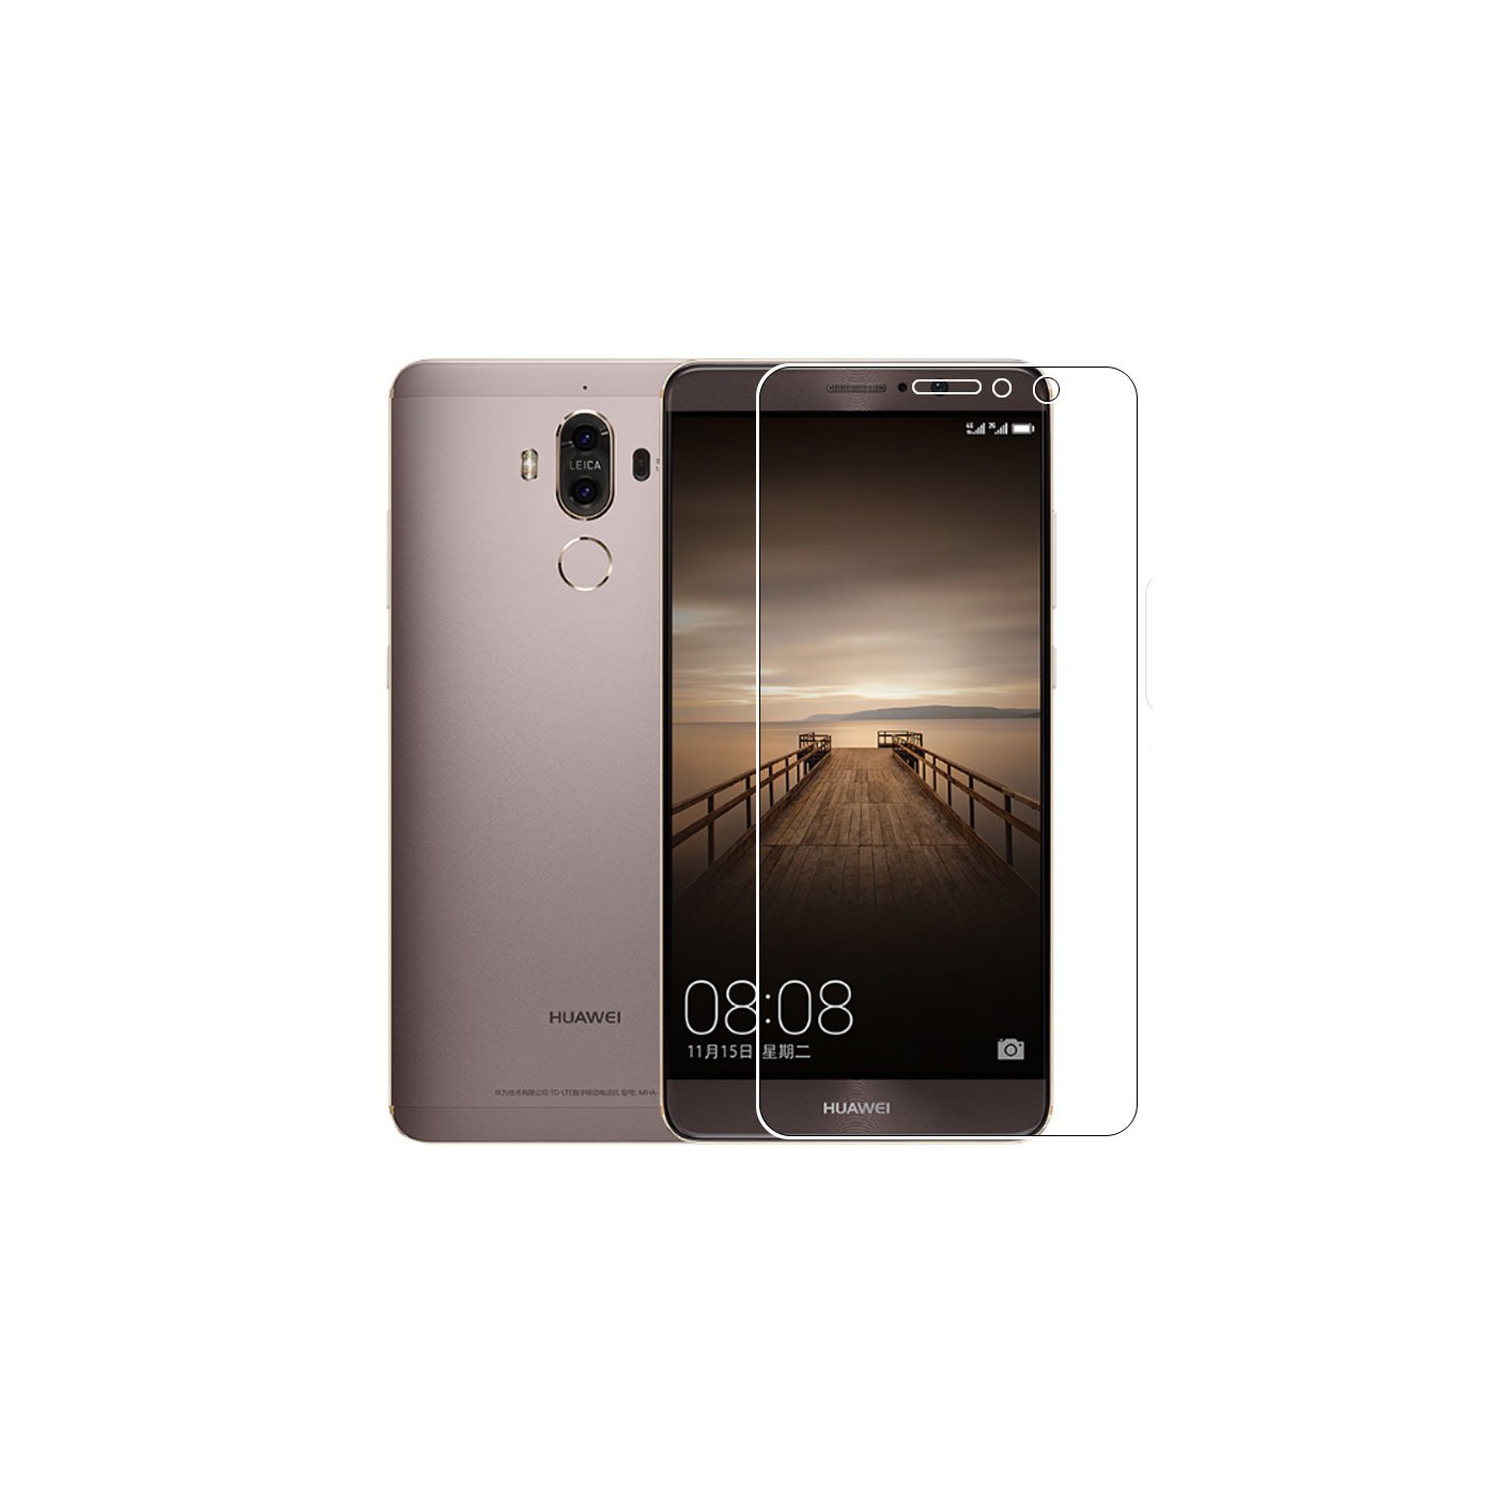 【2 Packs】 CSmart Premium Tempered Glass Screen Protector for Huawei Mate 9, Case Friendly & Bubble Free